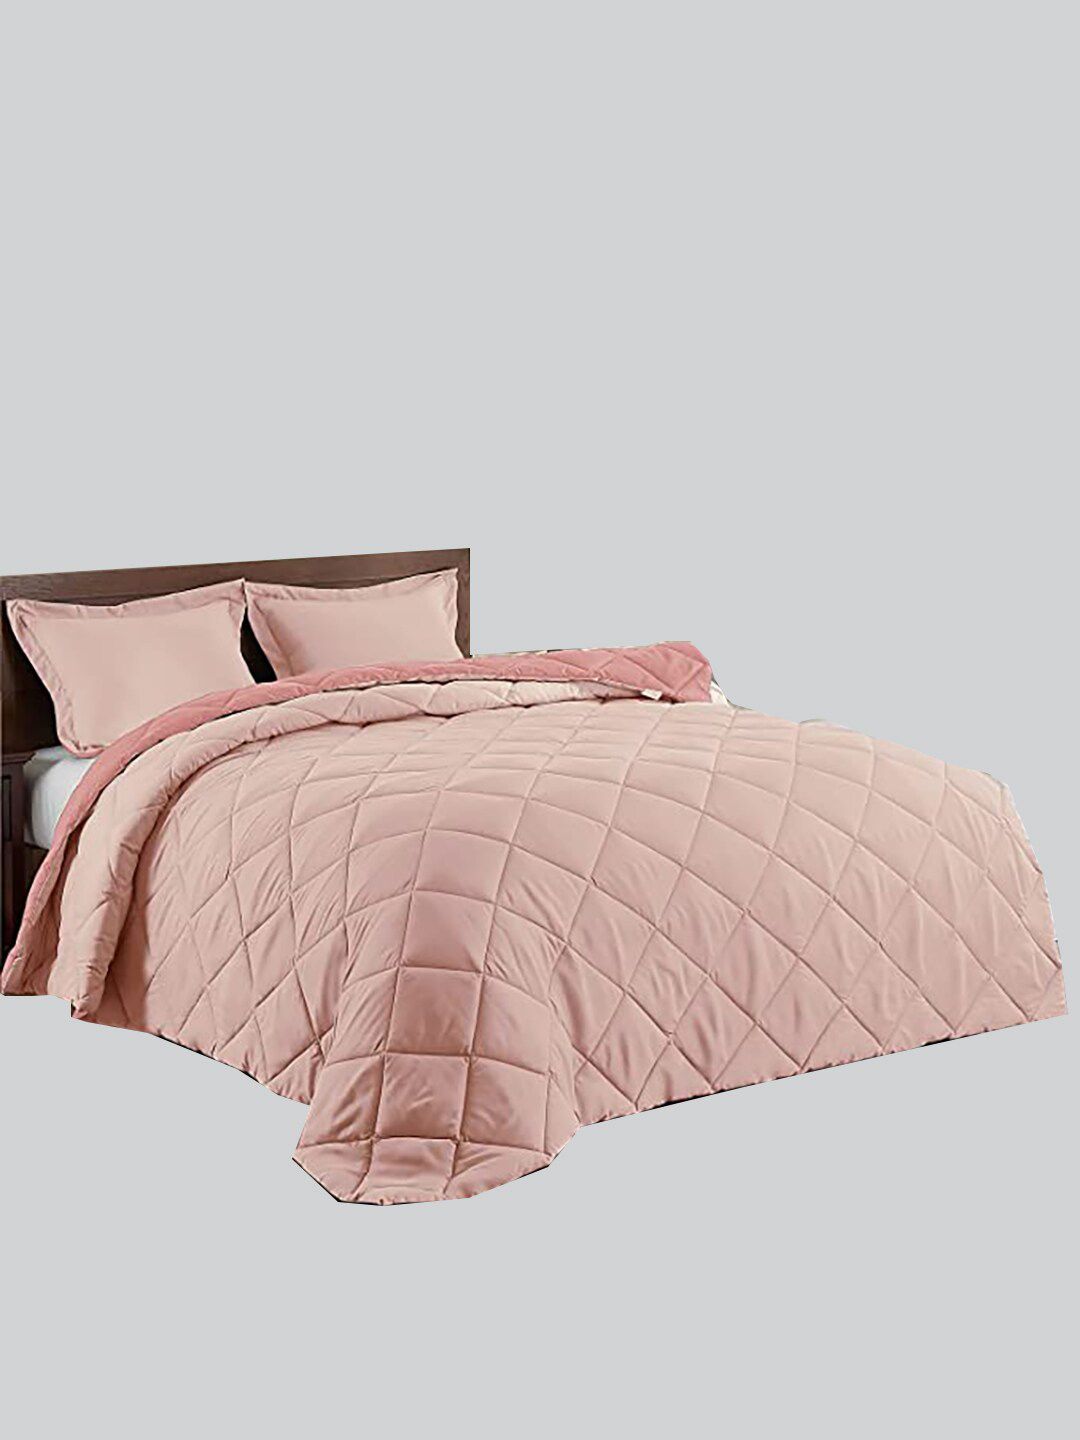 RAASO Pink & Peach-Coloured Microfiber AC Room Double Bed Blanket Price in India